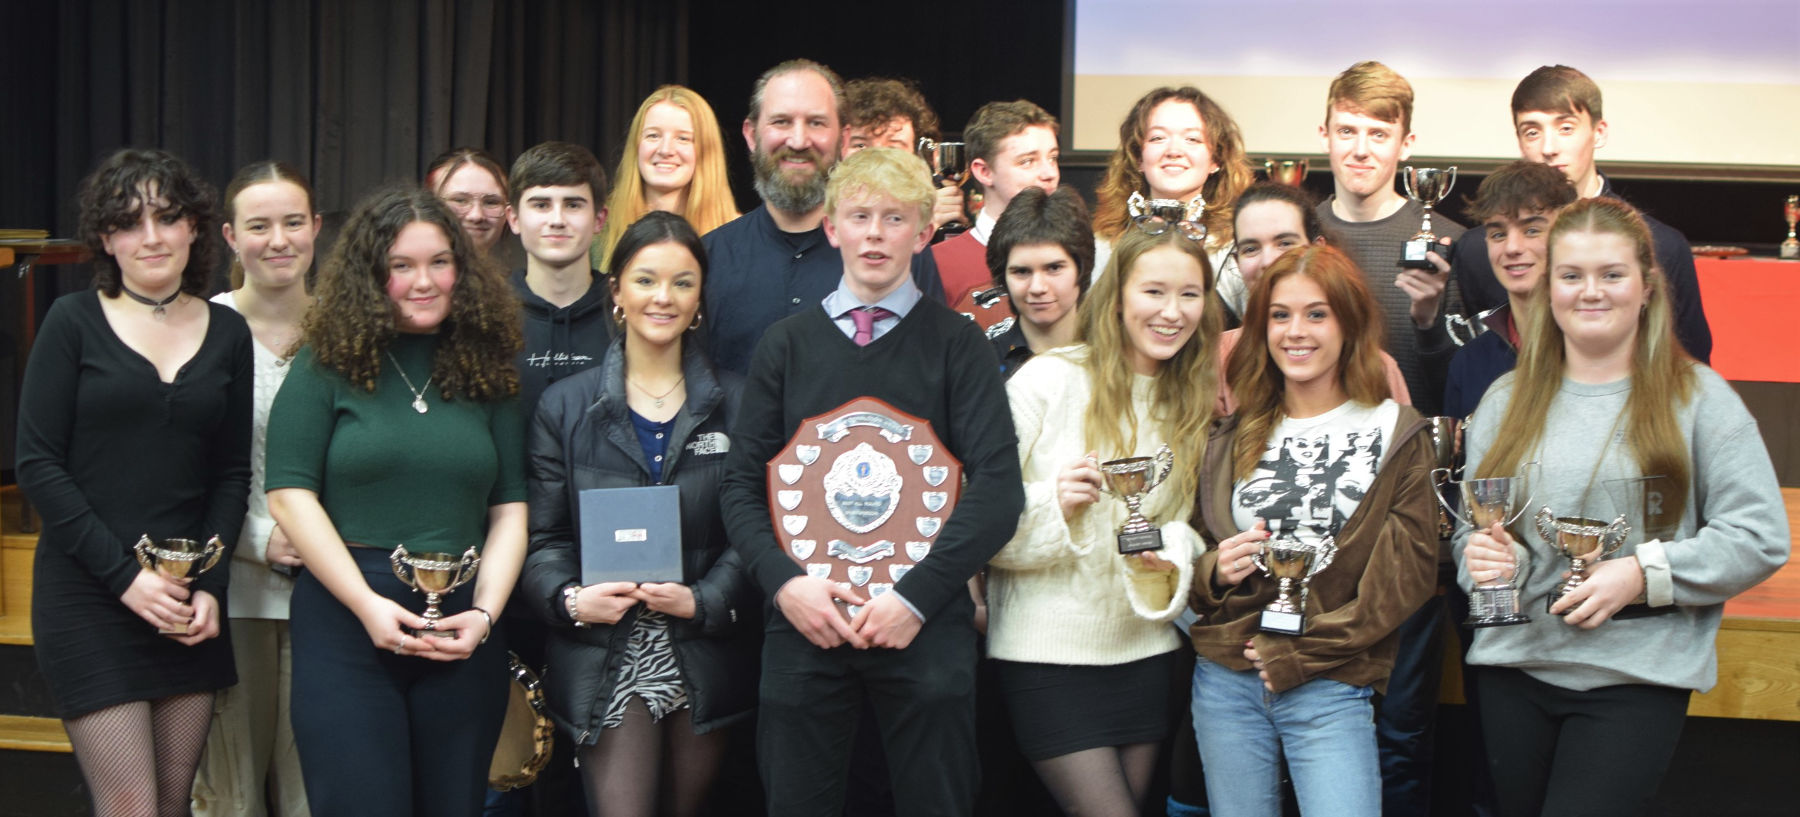 Award and trophy winners at the Rossett Presentation Evening